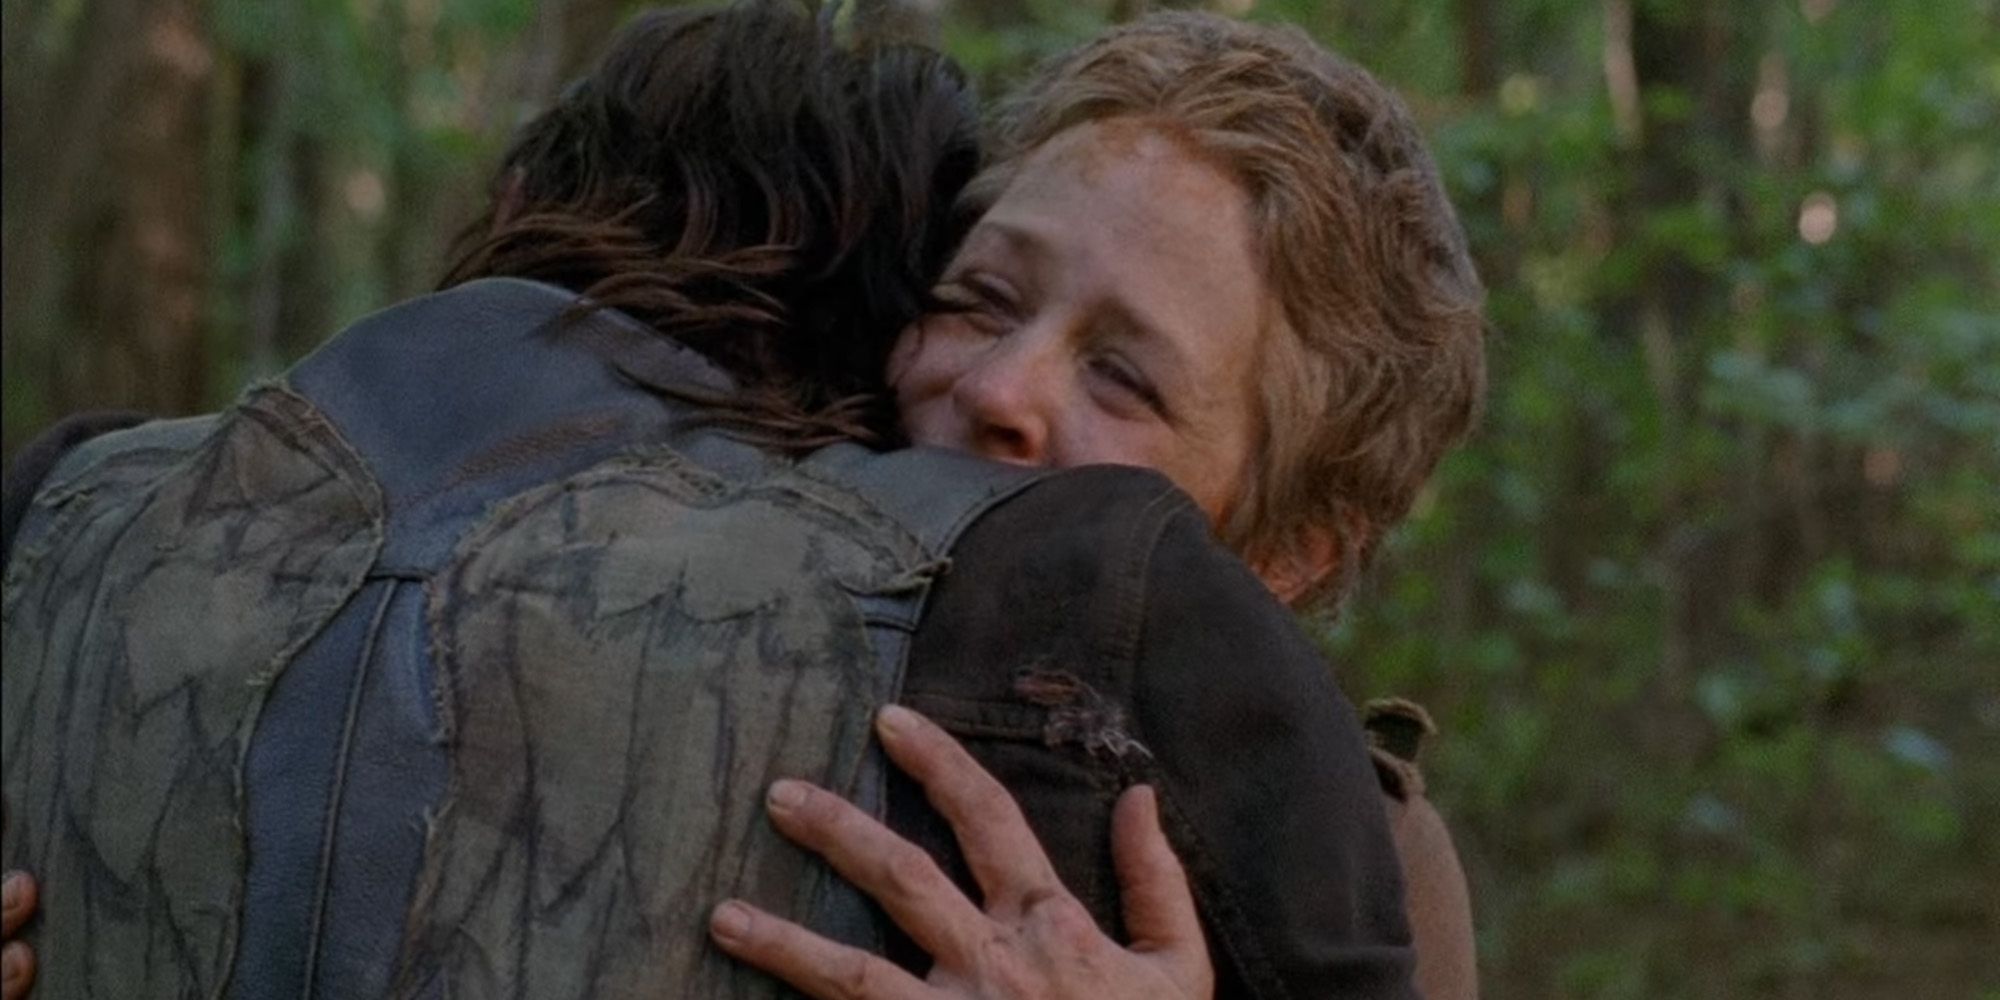 The Walking Dead Episode 0501, "No Sanctuary," Daryl and Carol